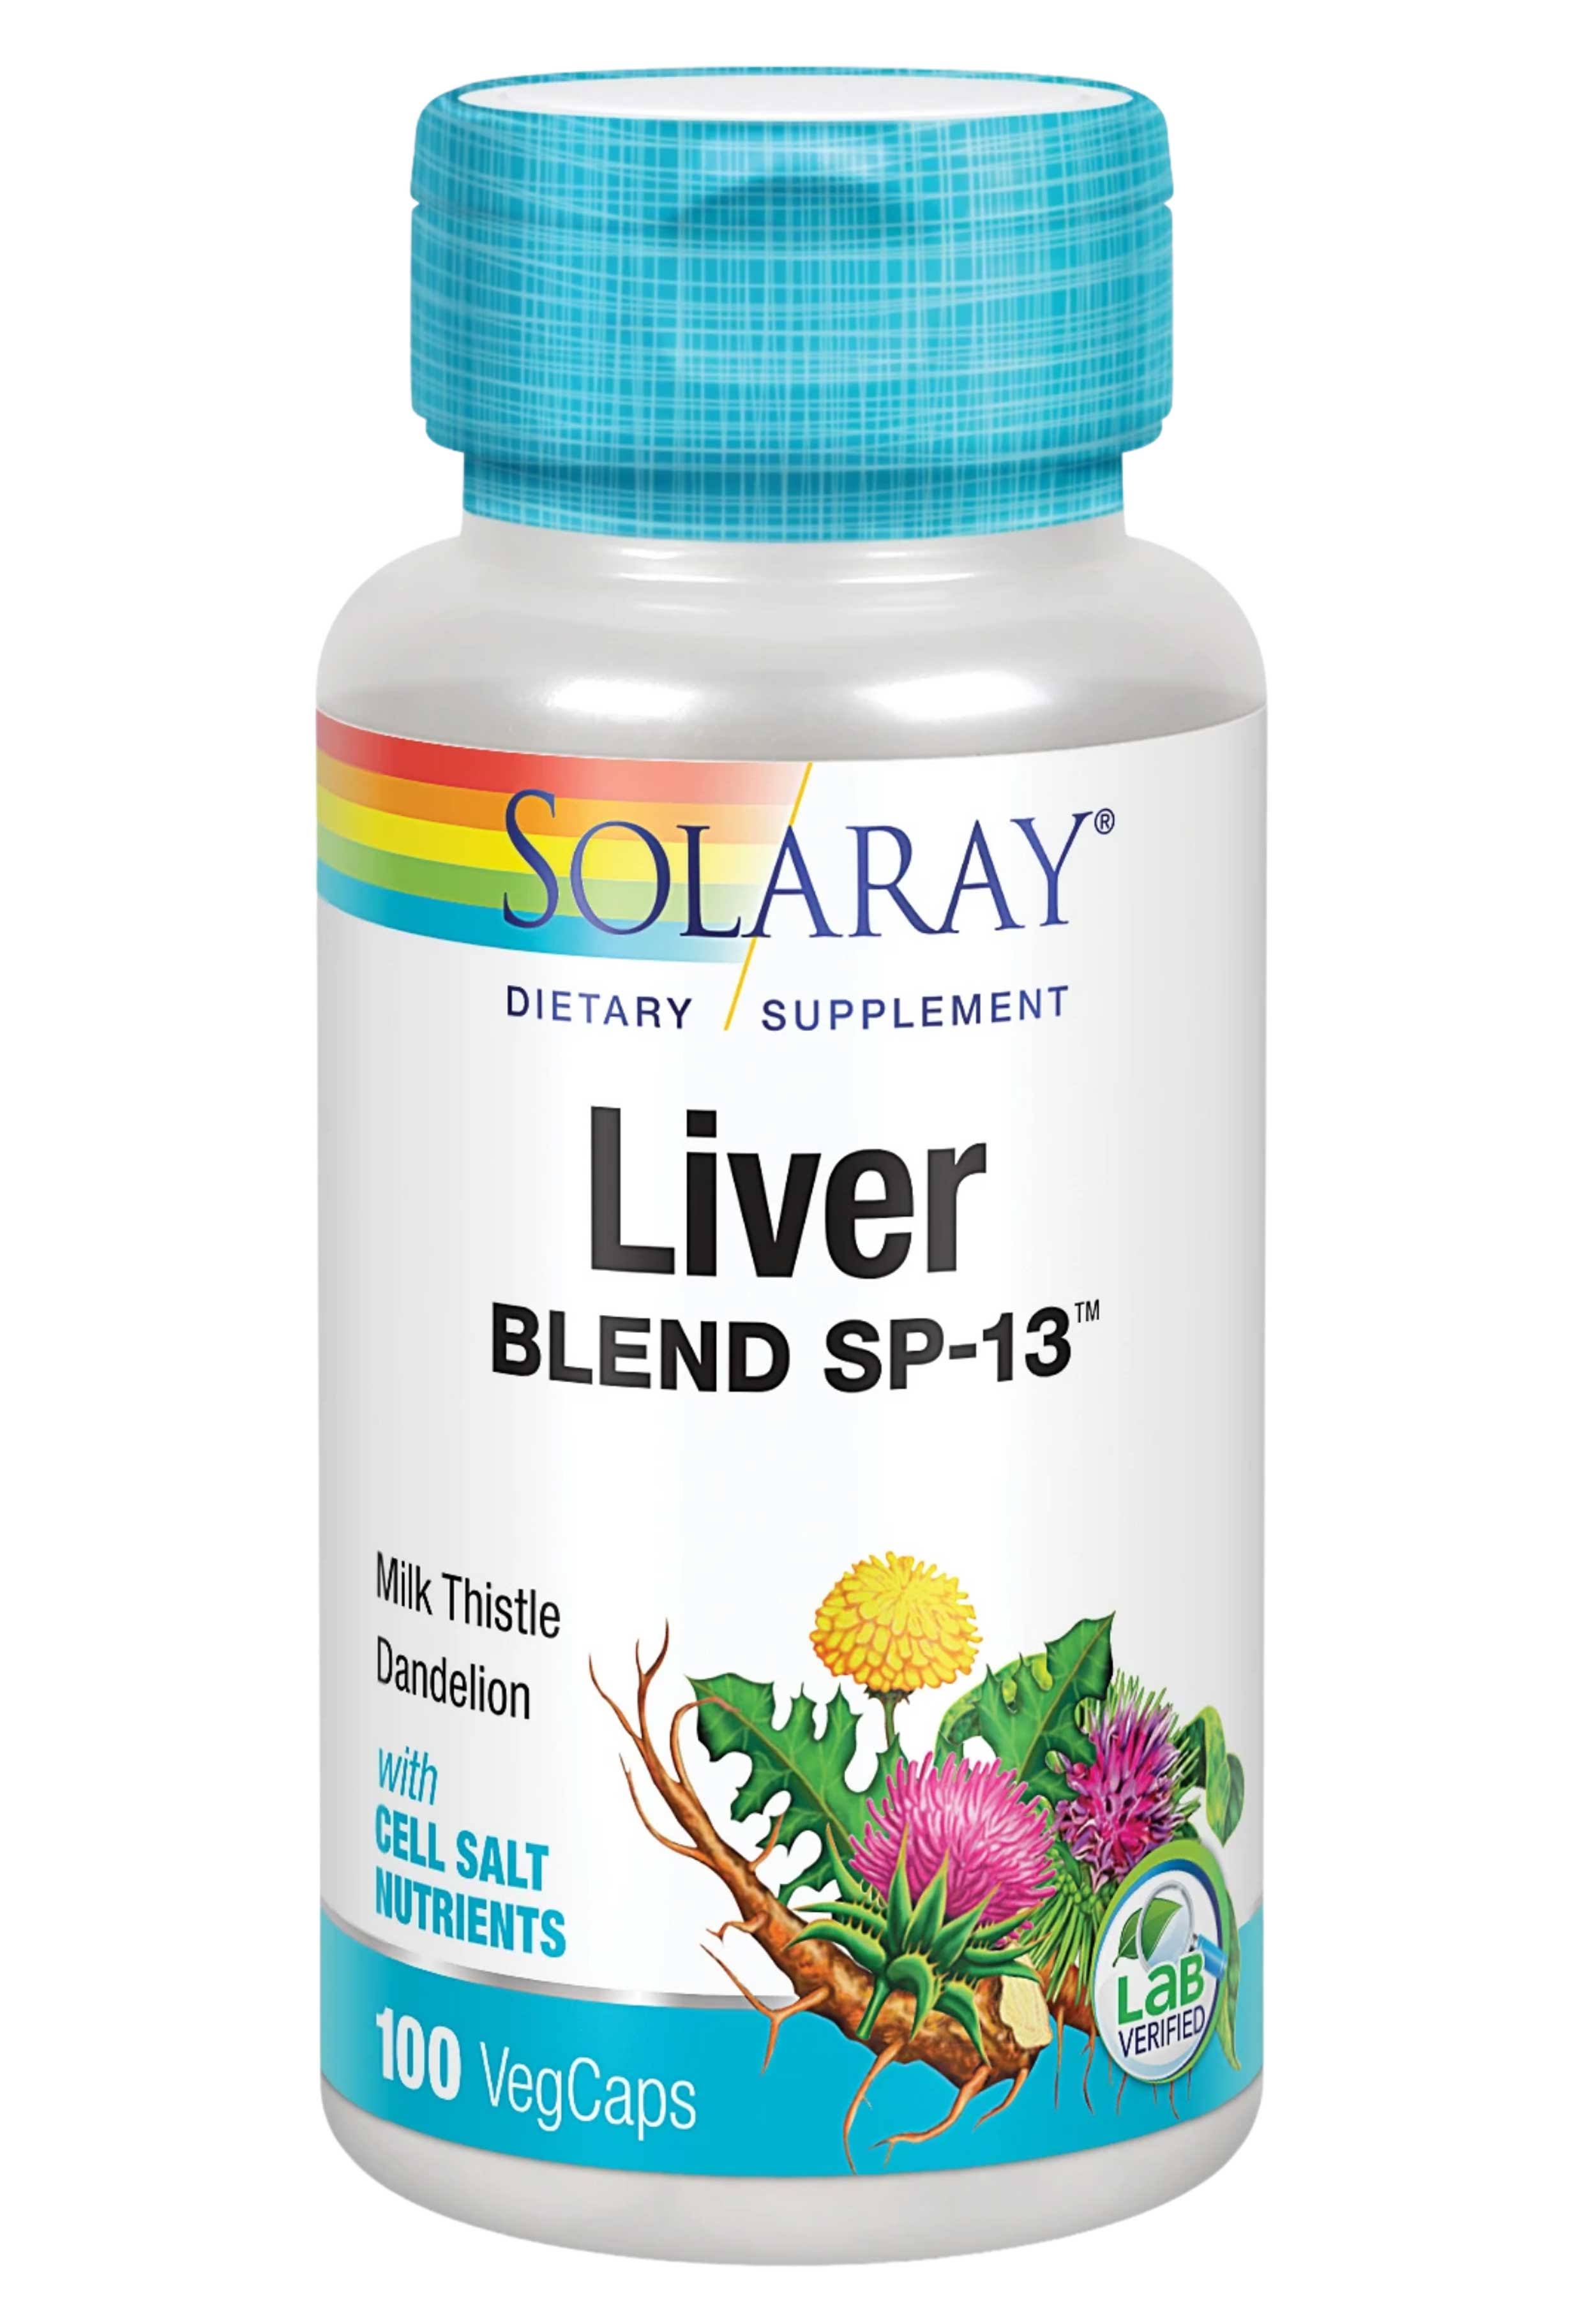 Solaray Liver Blend Sp 13 Dietary Supplement Capsules - 100ct